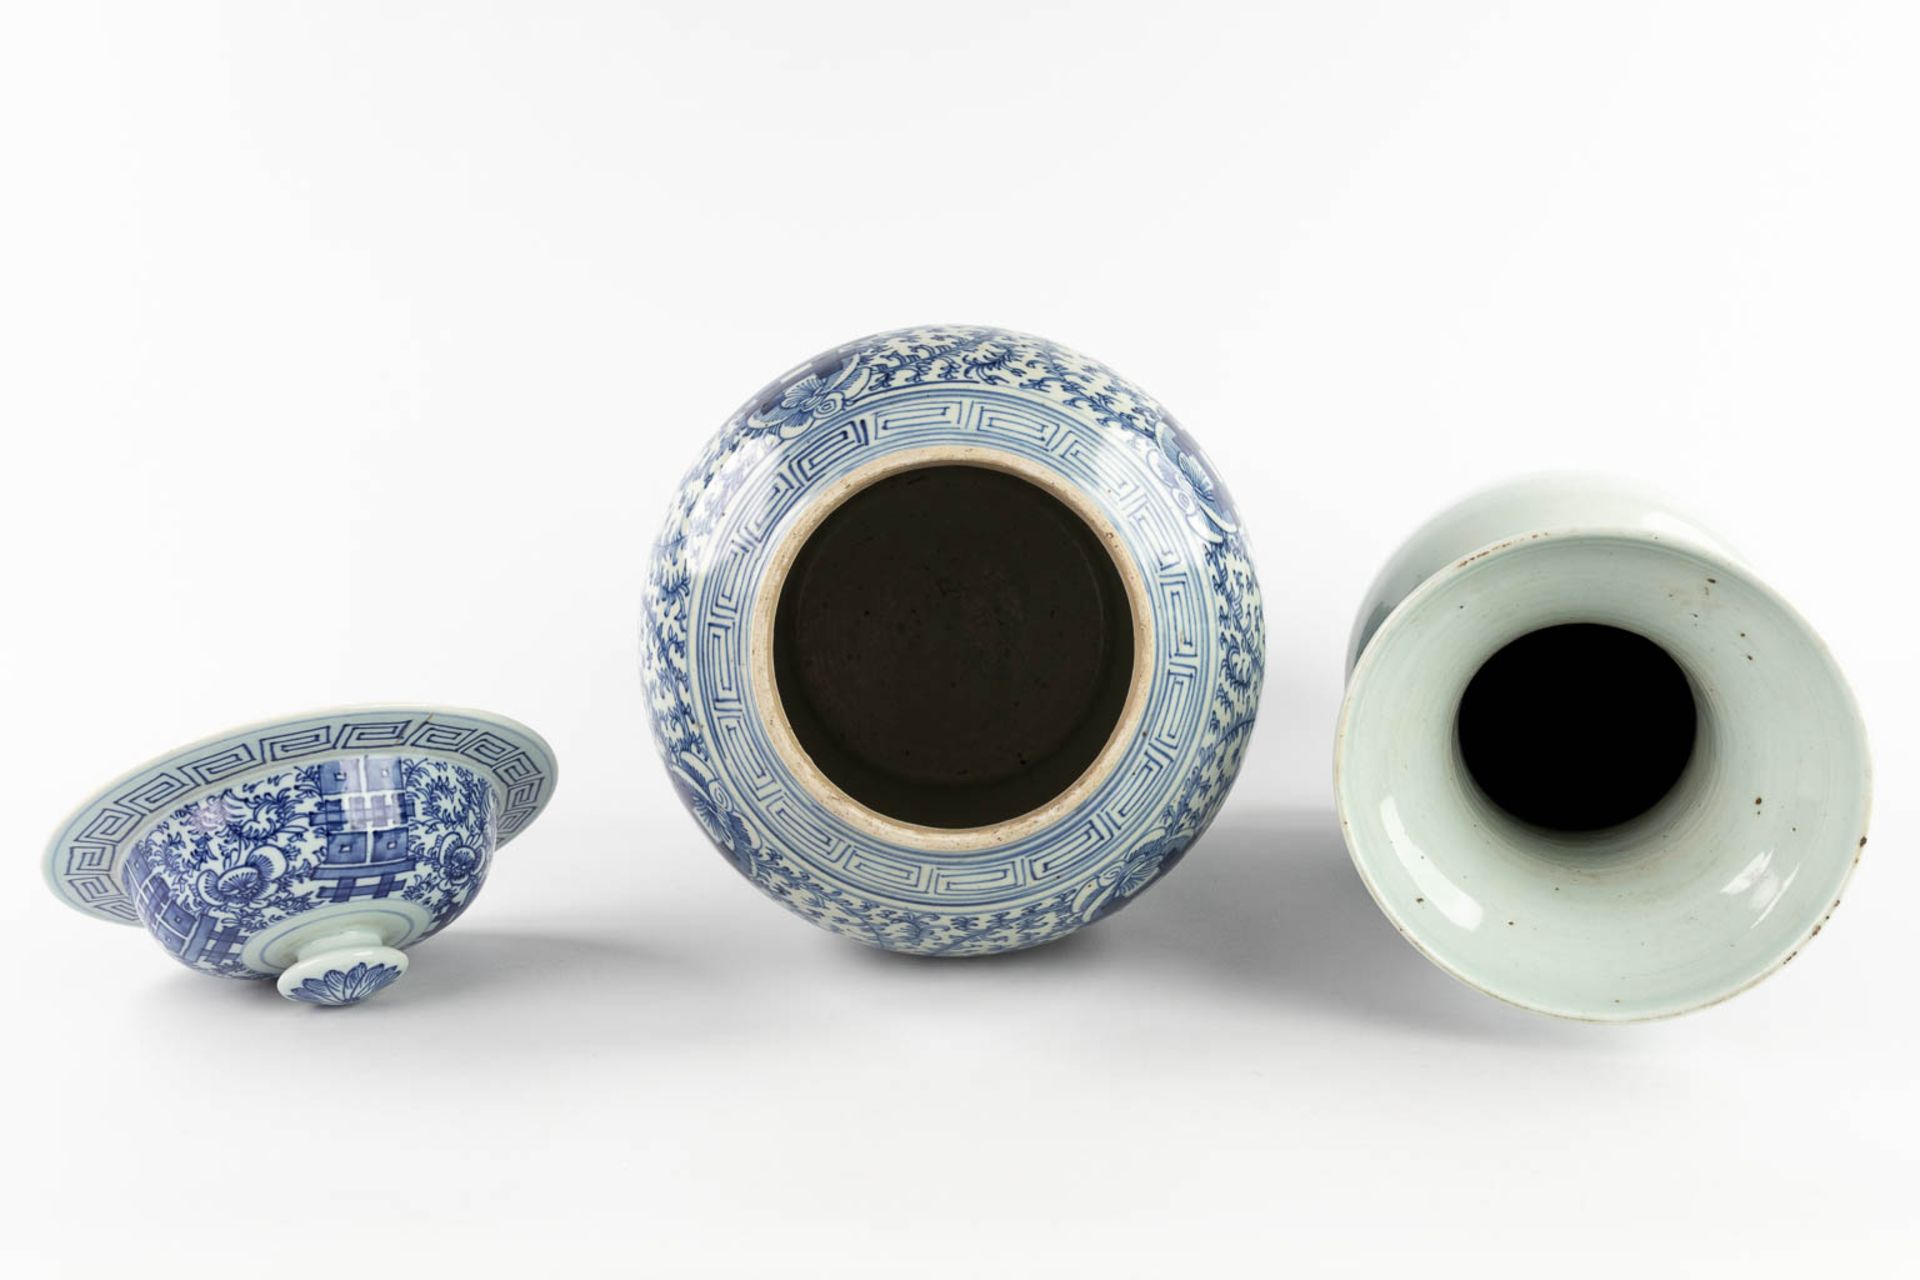 Two Chinese vases, of which one with a lid. Blue-white decor. 19th/20th C. (H:45 x D:25 cm) - Image 9 of 13